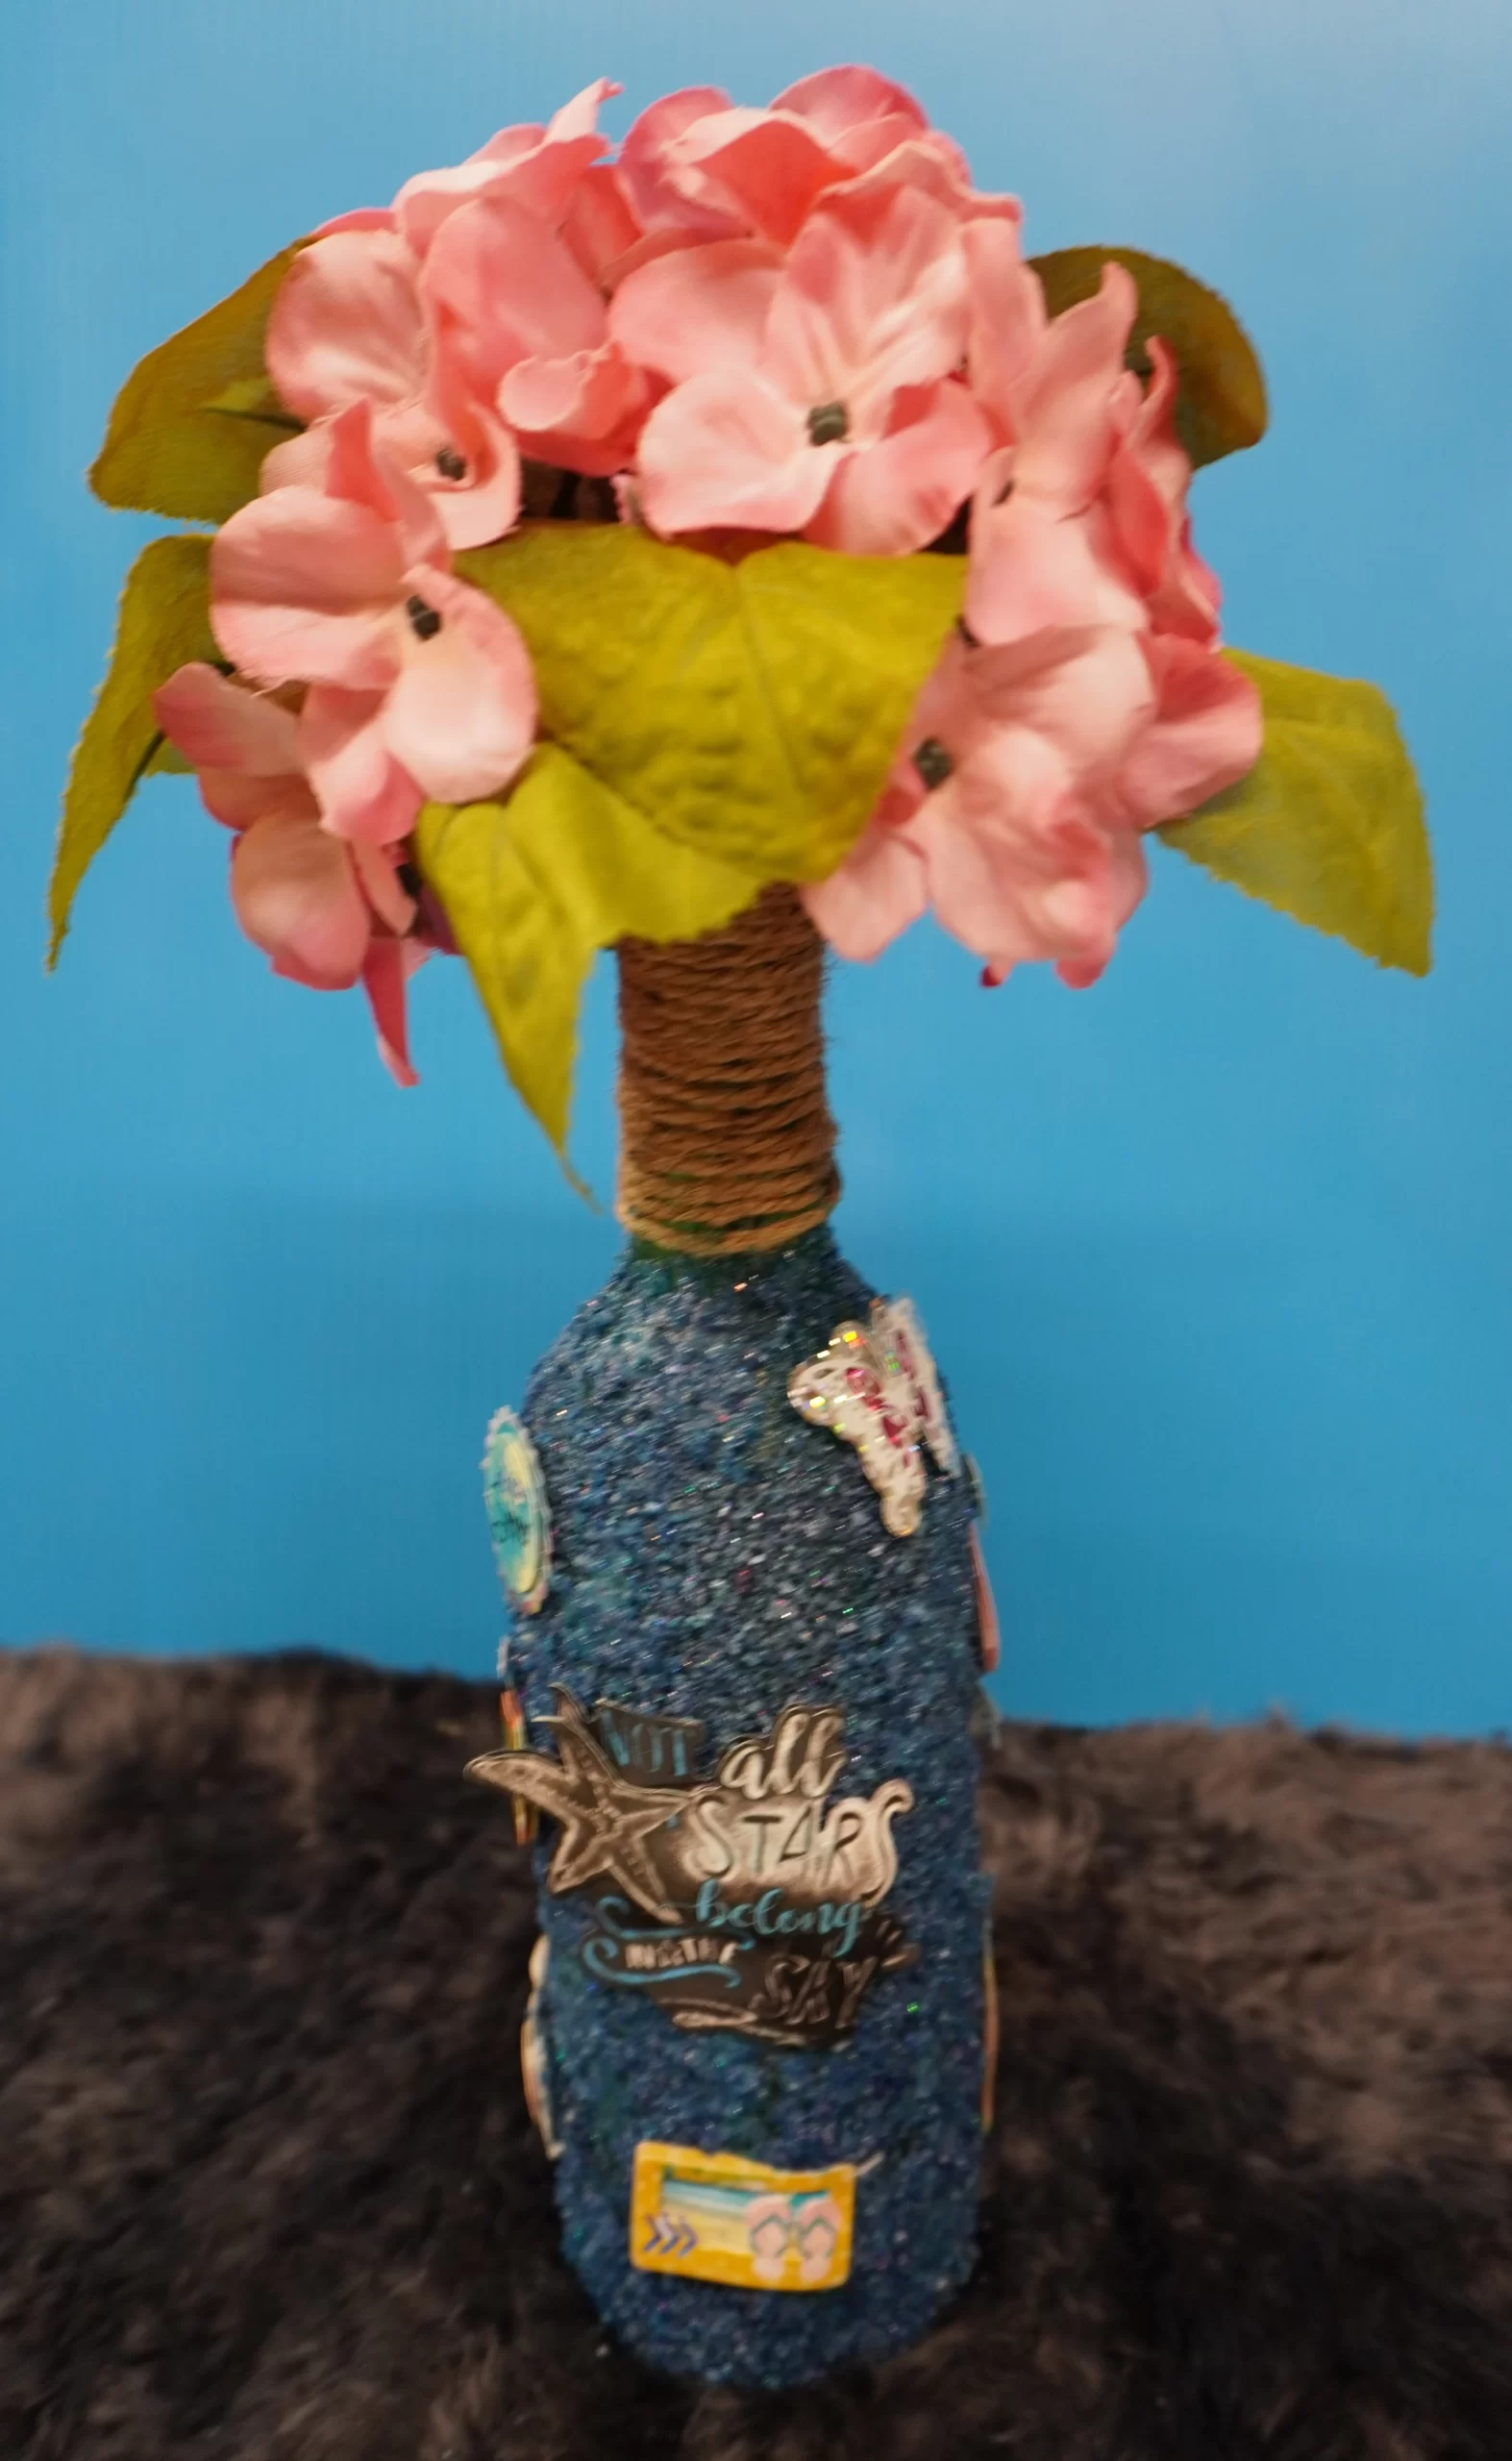 Bottle face blue with pink flowers - Copy - Copy